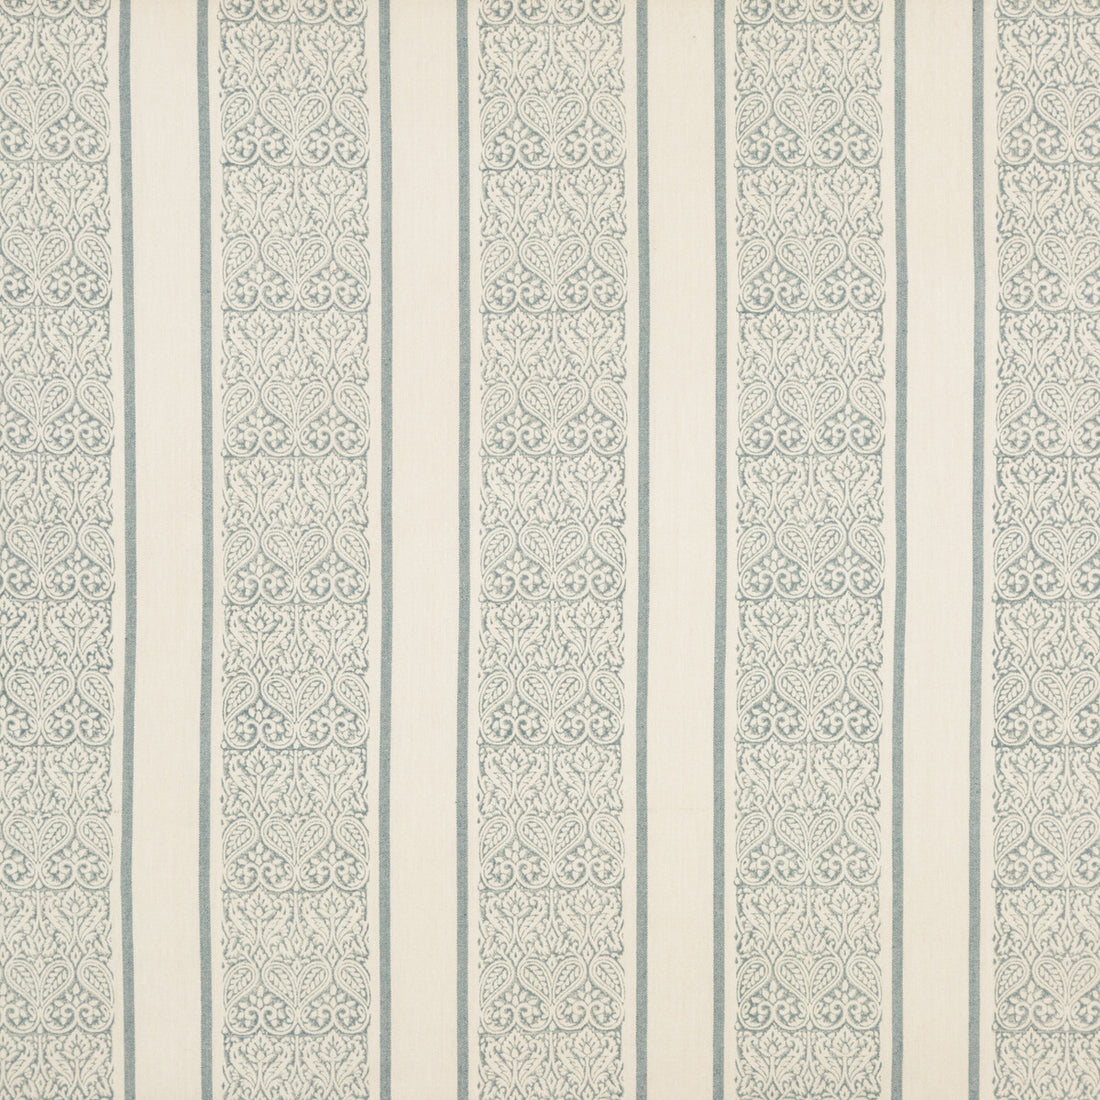 Polperro fabric in teal color - pattern BP10556.2.0 - by G P &amp; J Baker in the Artisan collection